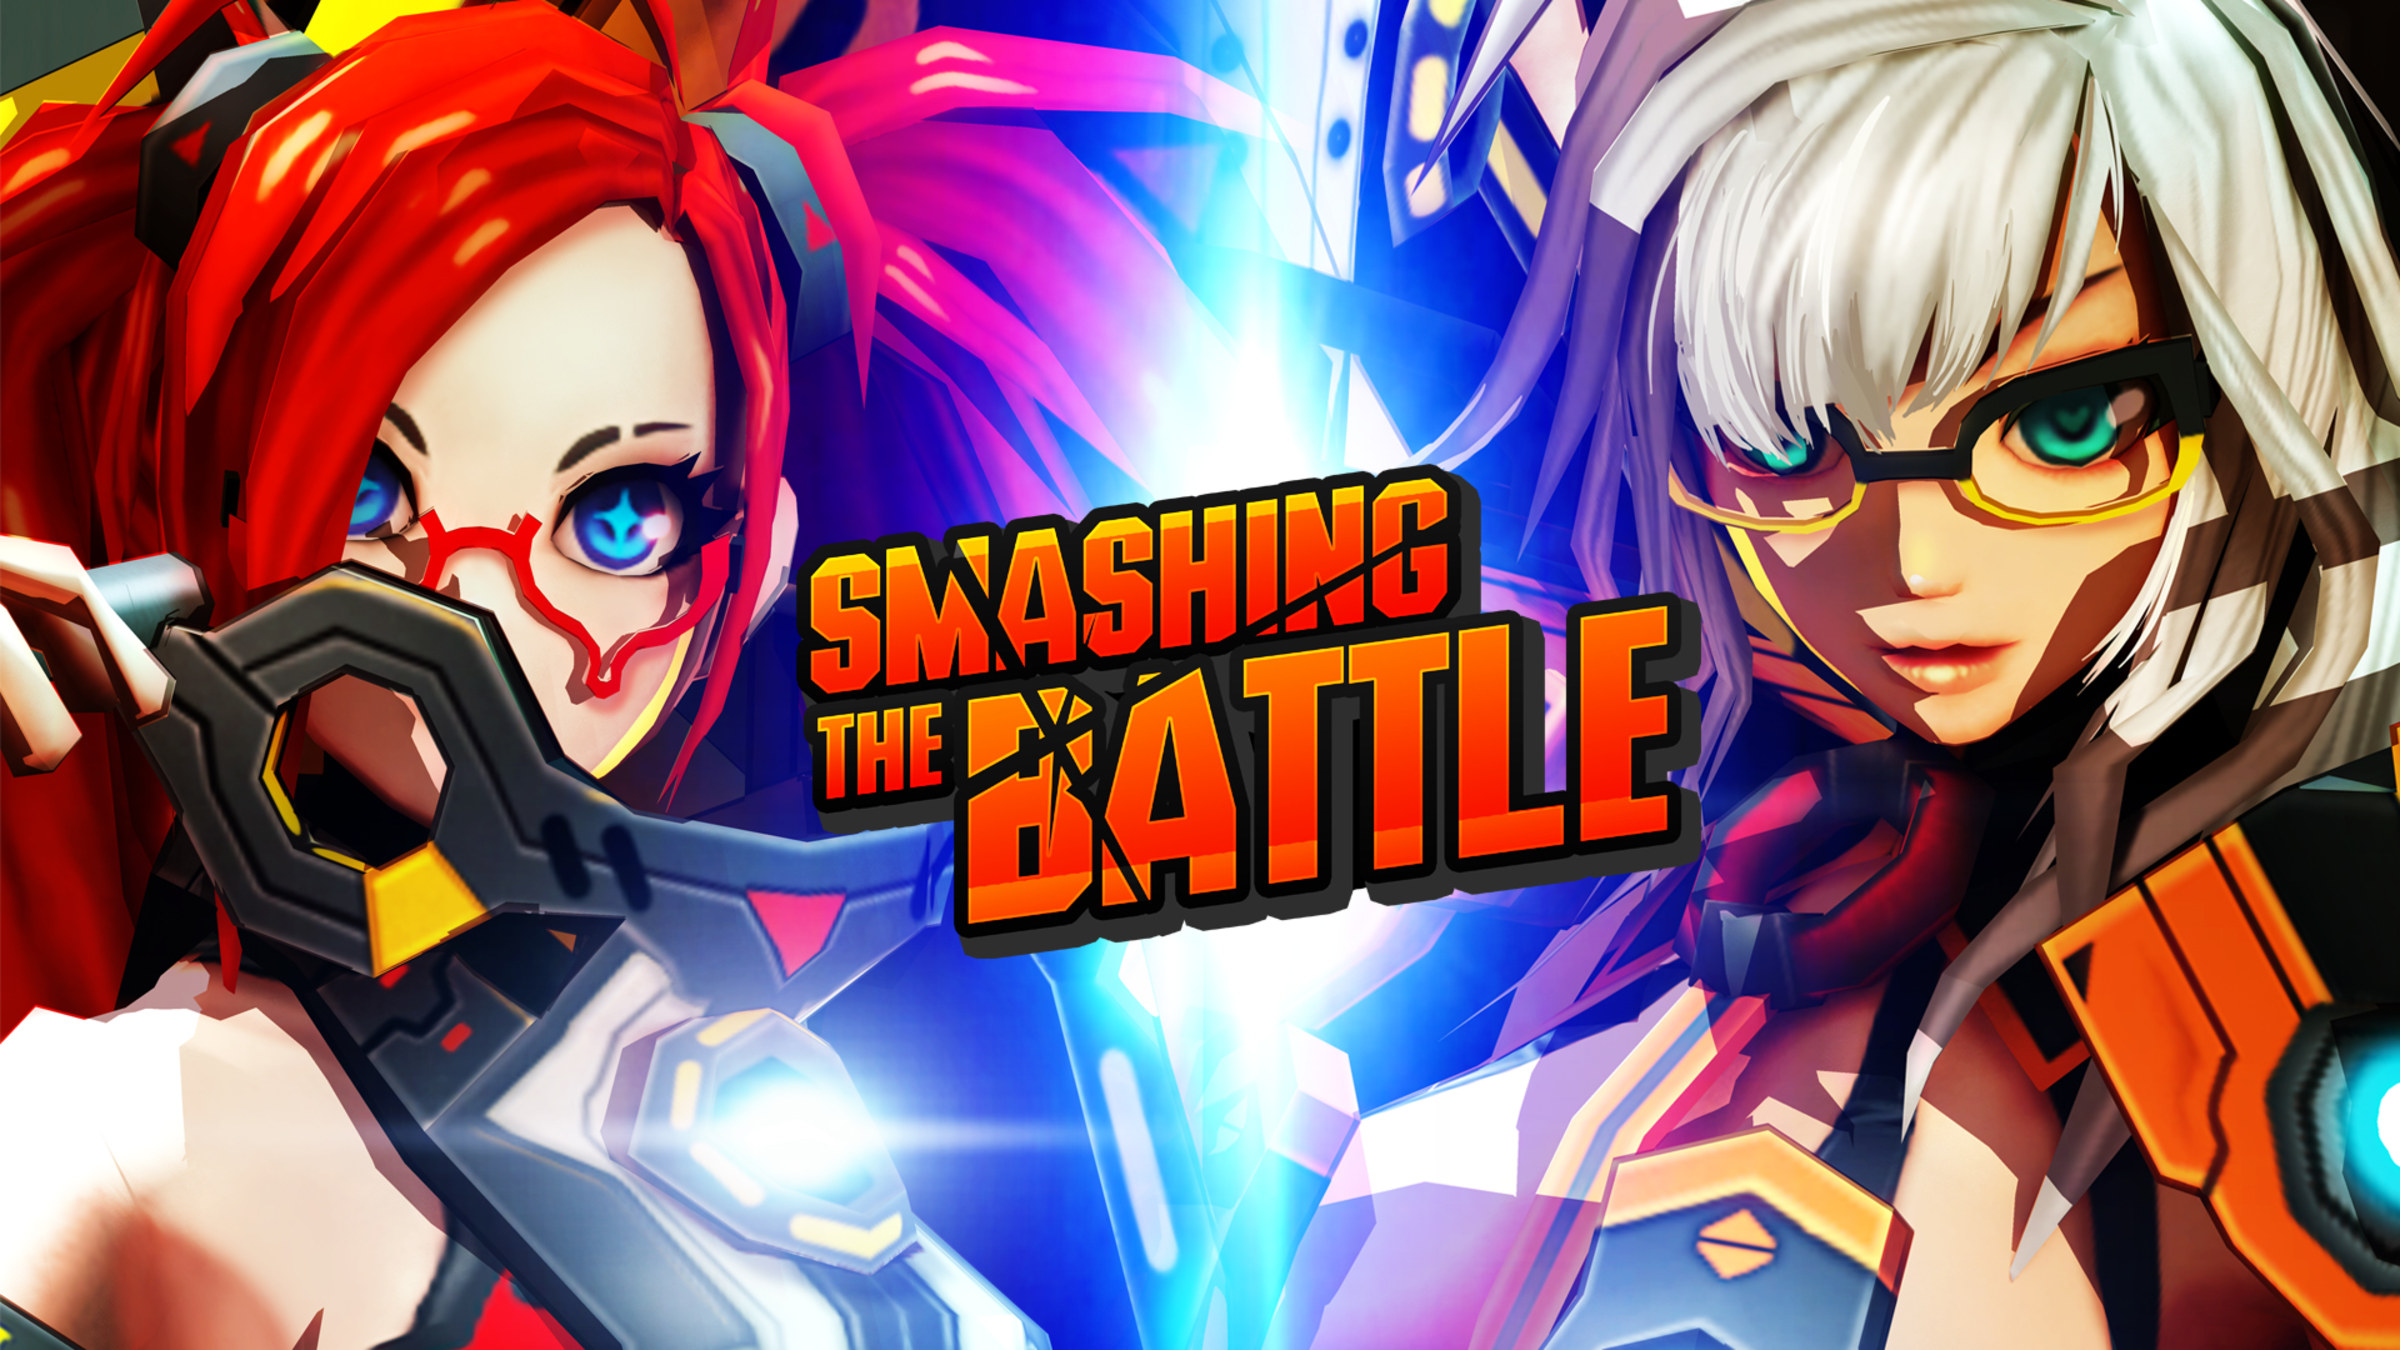 Smashing The Battle For Nintendo Switch - Nintendo Official Site